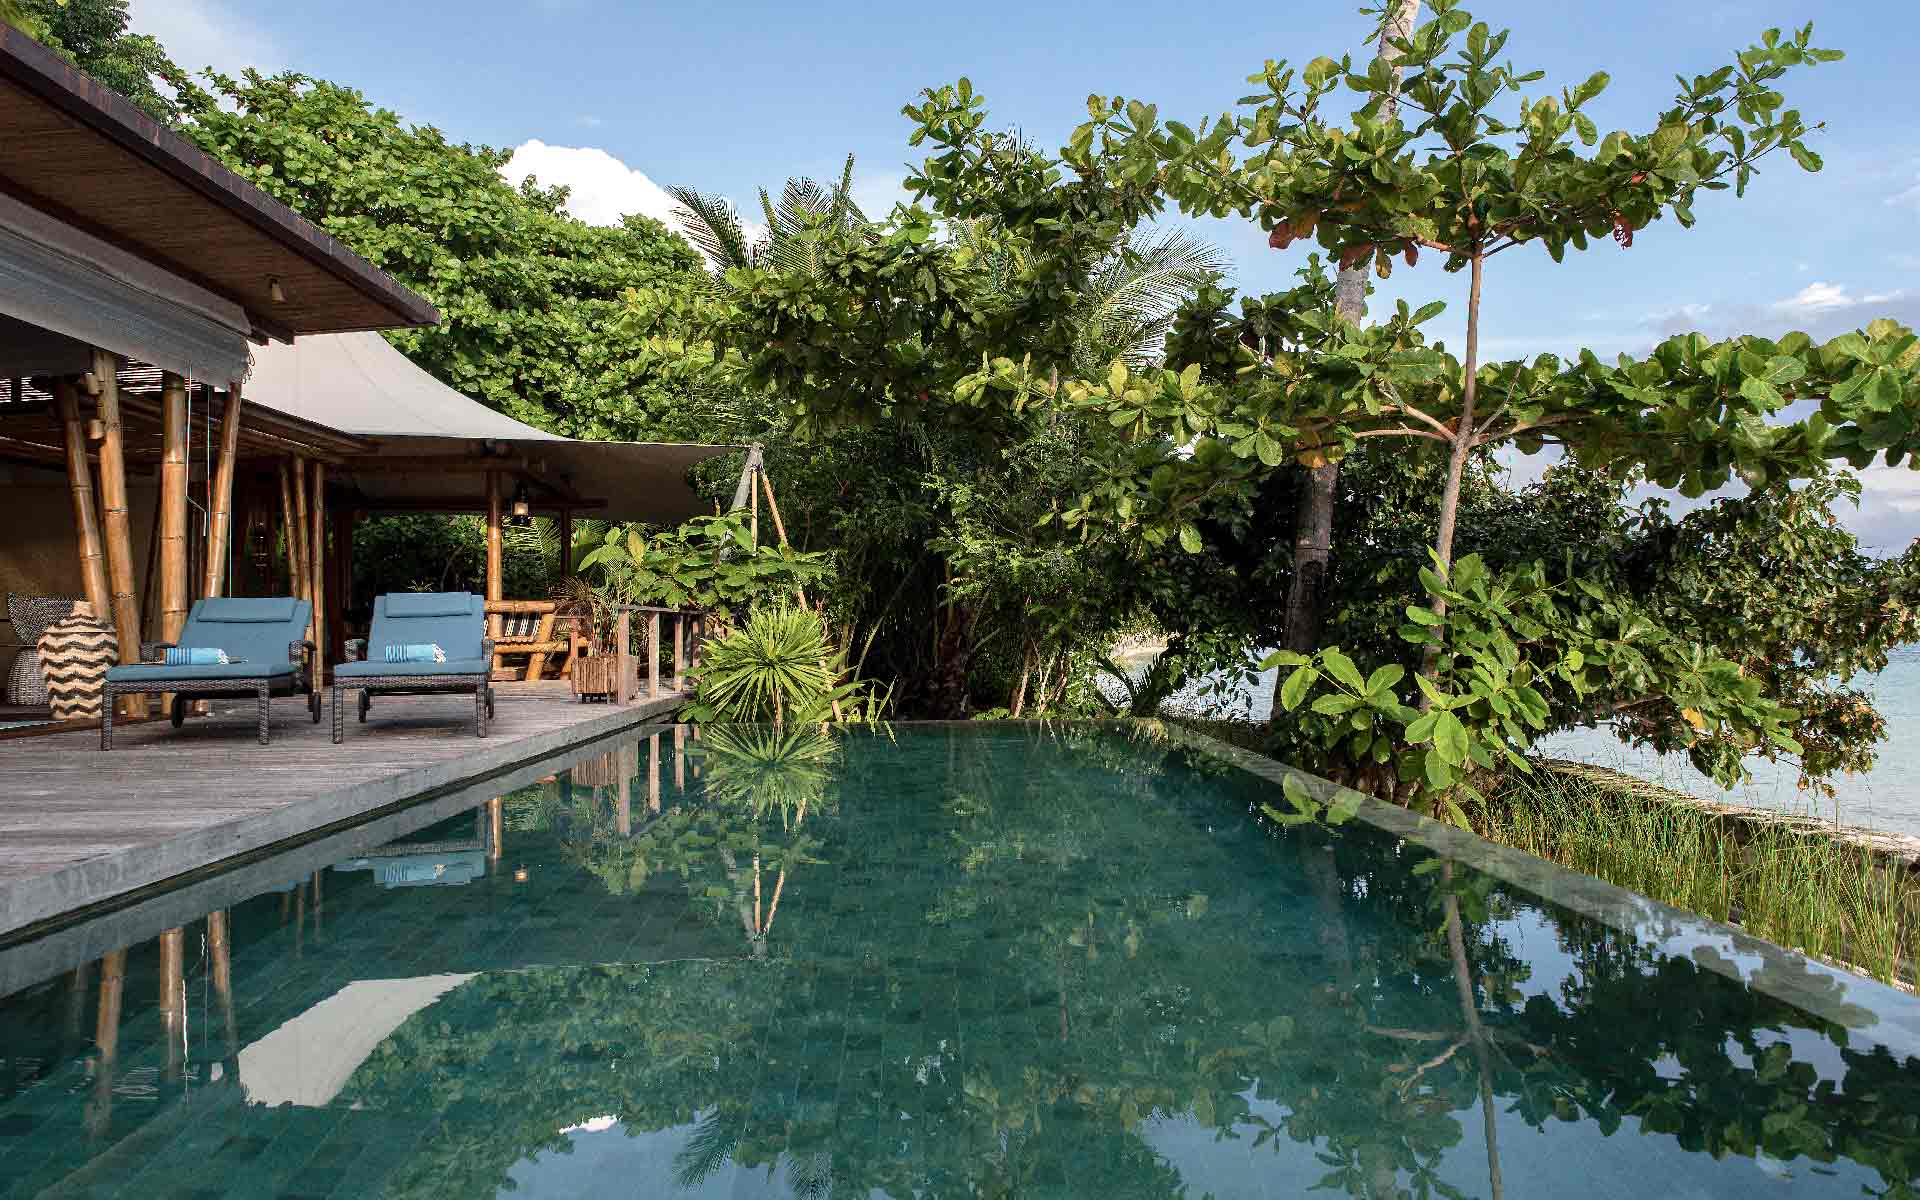 Escape to our Two-bedroom Infinity Pool Villa at Bawah Reserve. Experience open-air luxury, private infinity pool, and captivating sea views.